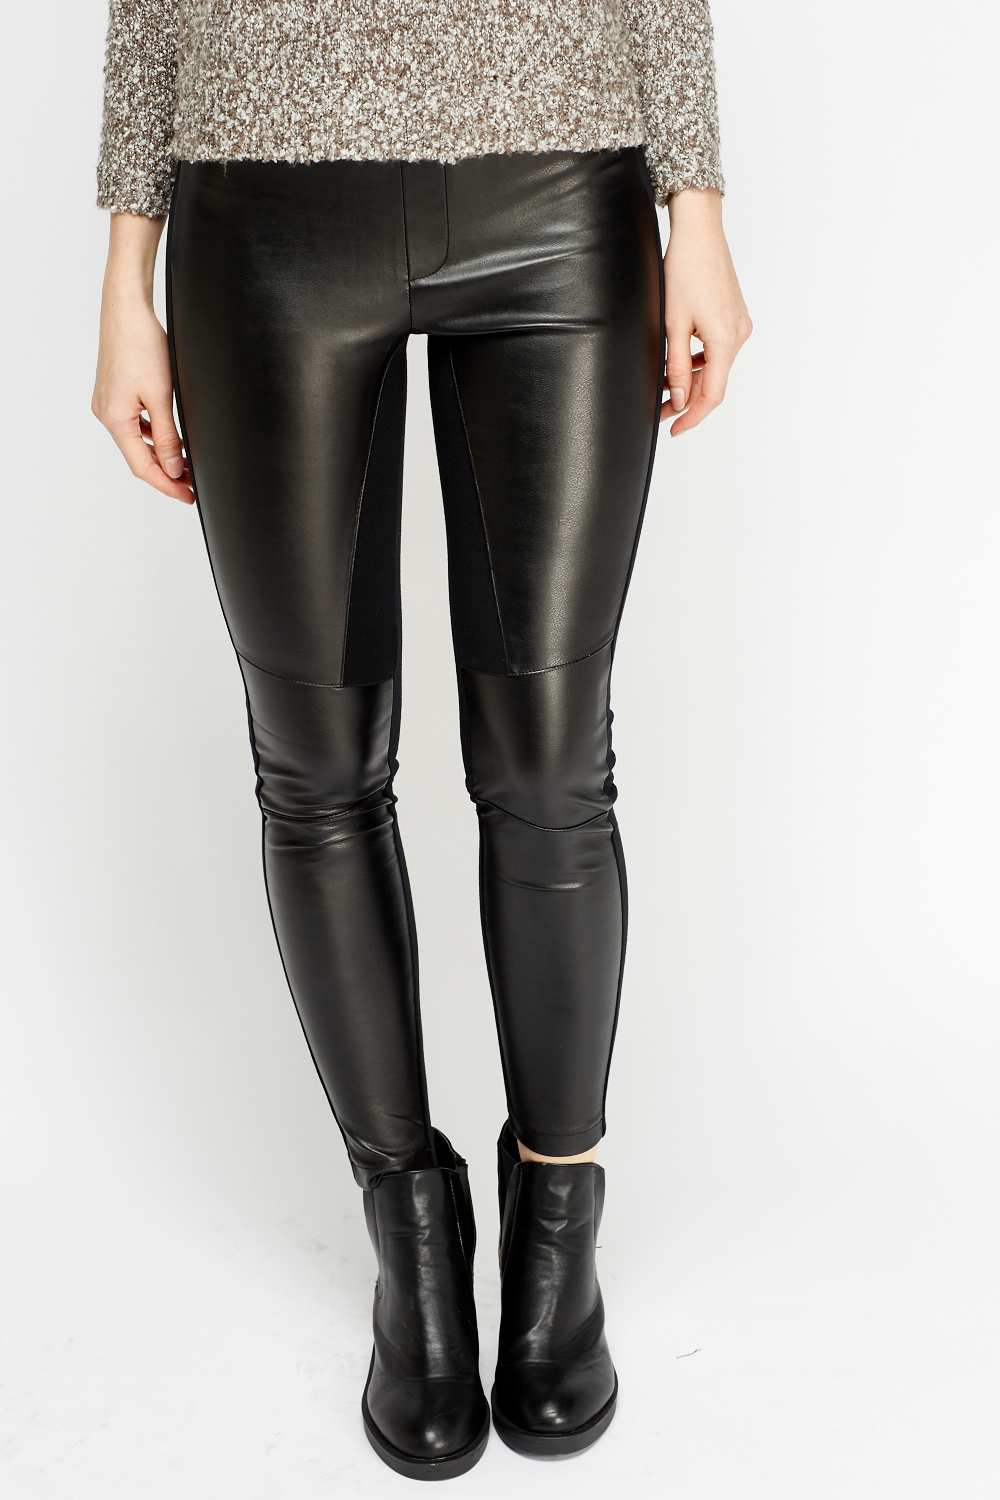 Download Faux Leather Front Leggings - Just $7